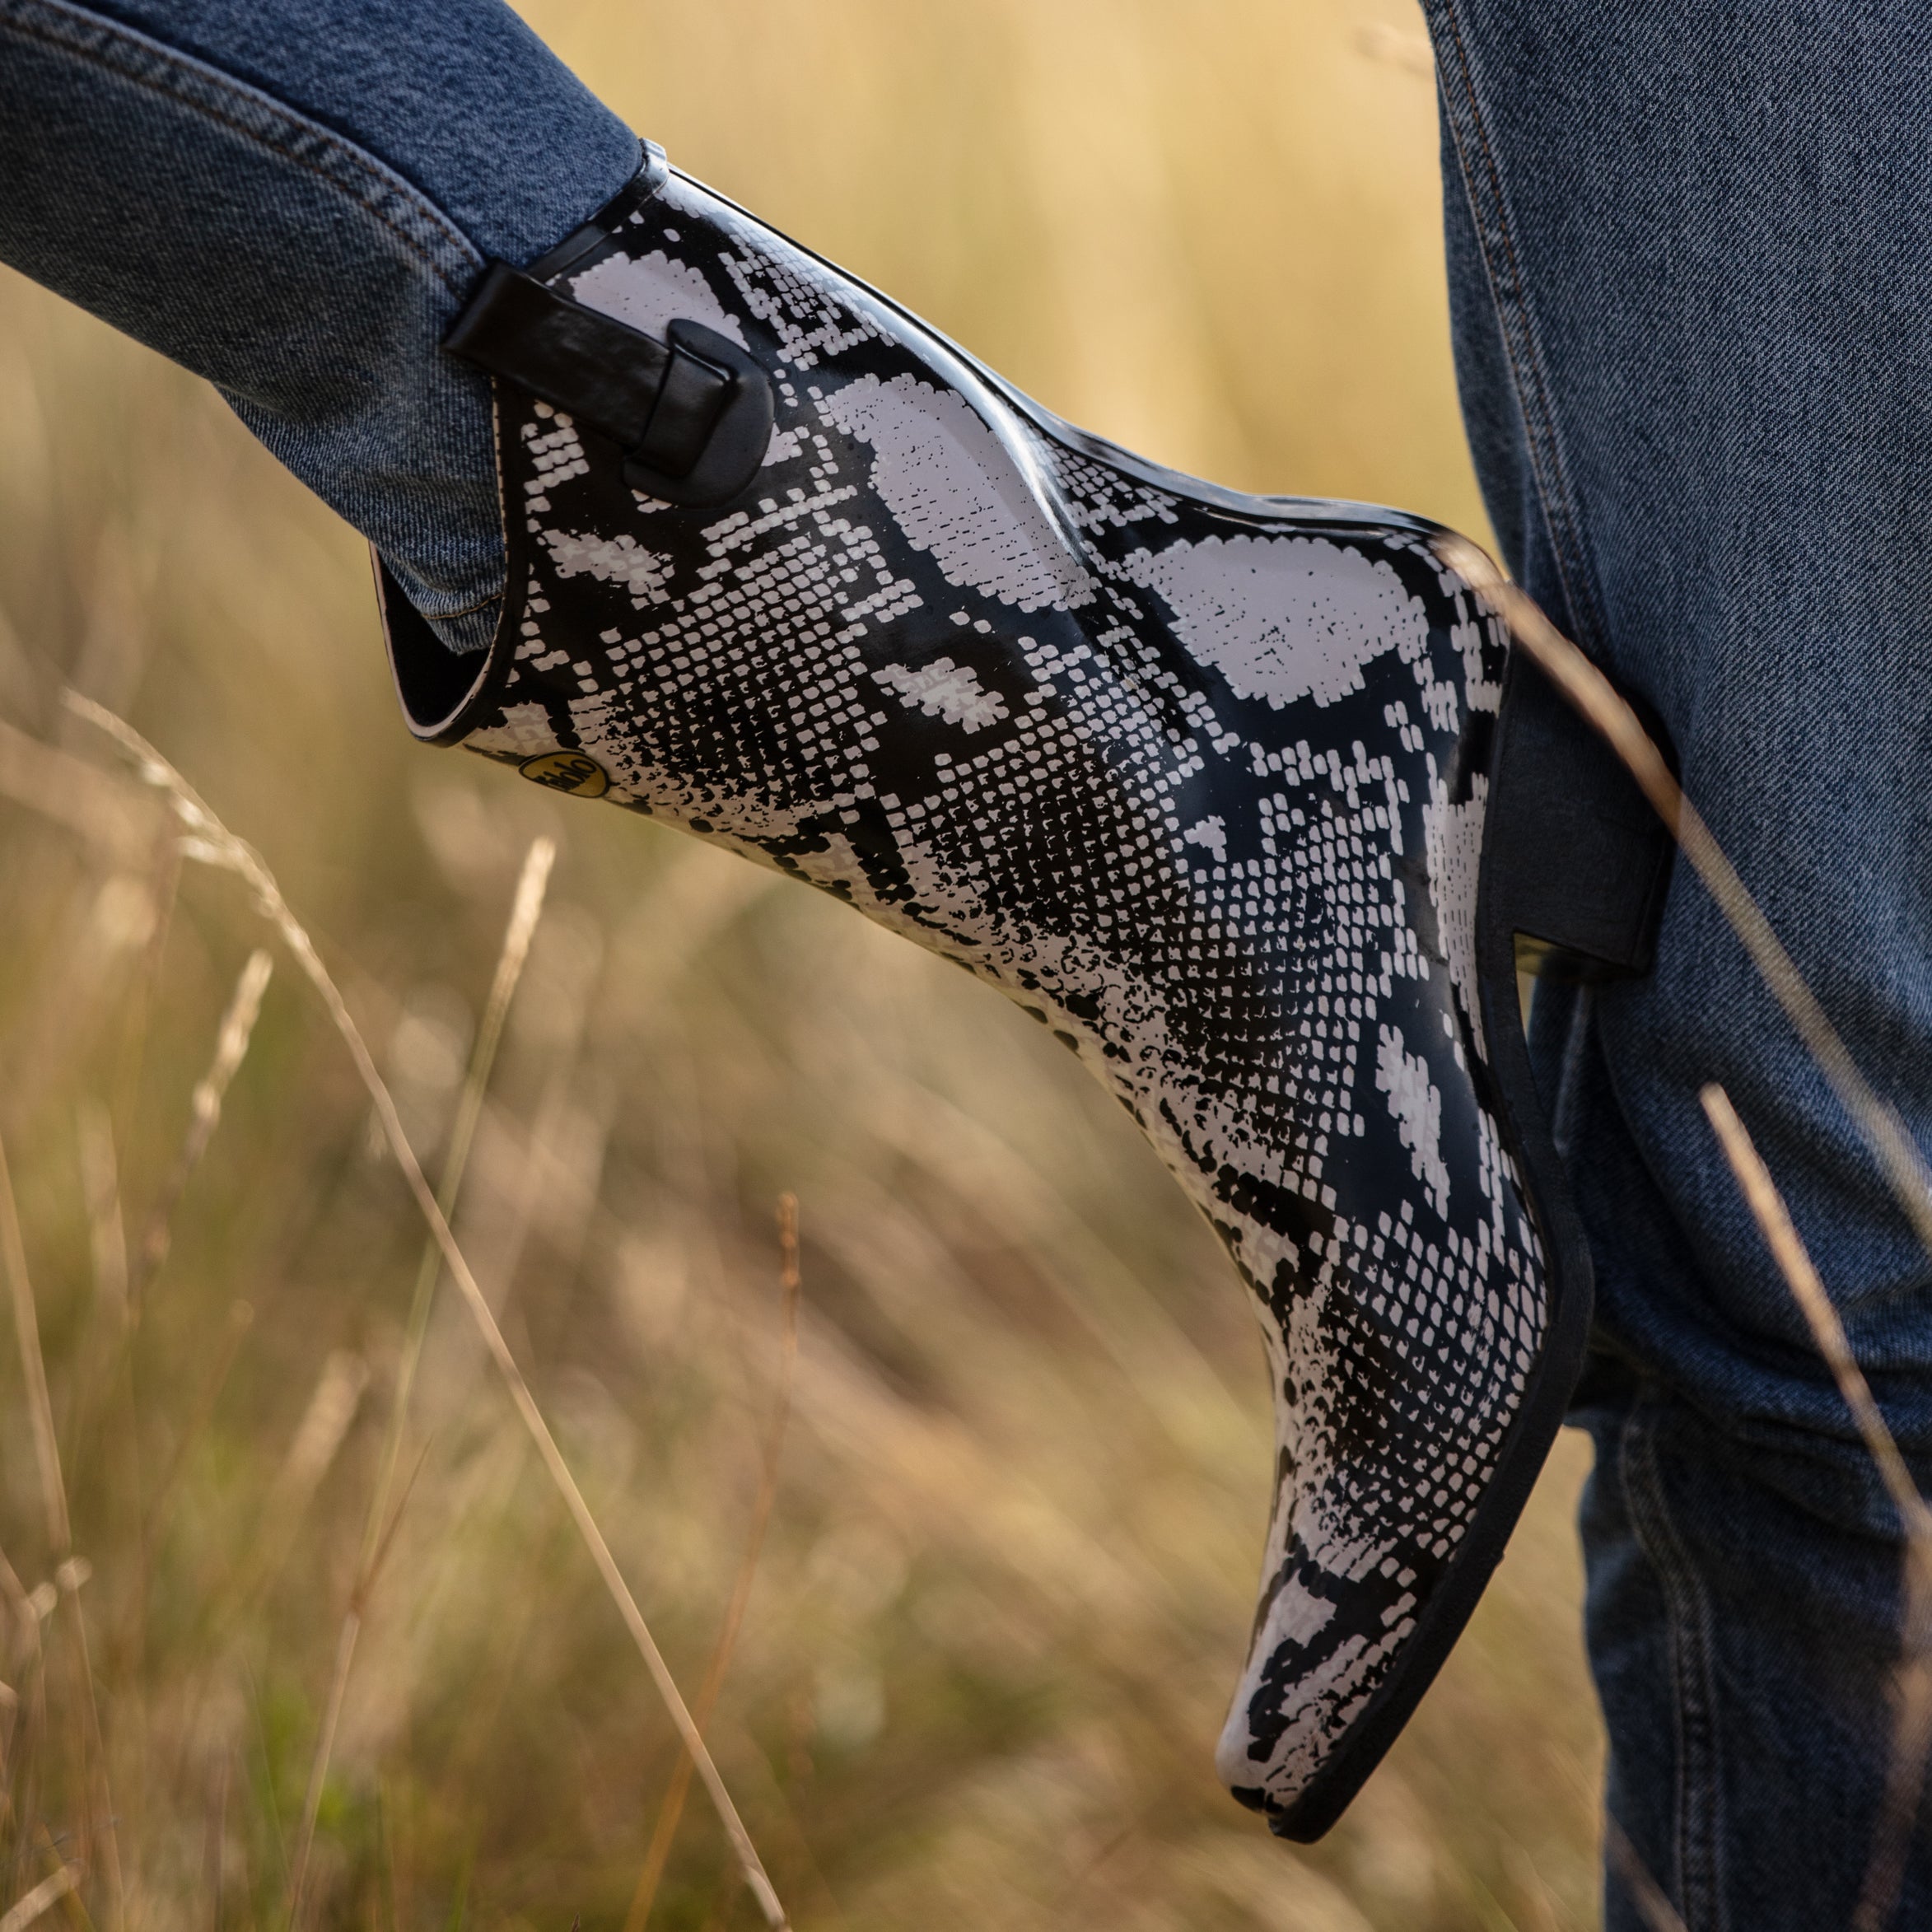 Chic and stylish, these Talolo Women's Bandy snake patterned black and white cowboy welly boots have a 3cm heel and will reach the middle of the calf. Cut close to the leg for a hot flattering look.  Lined for comfort.